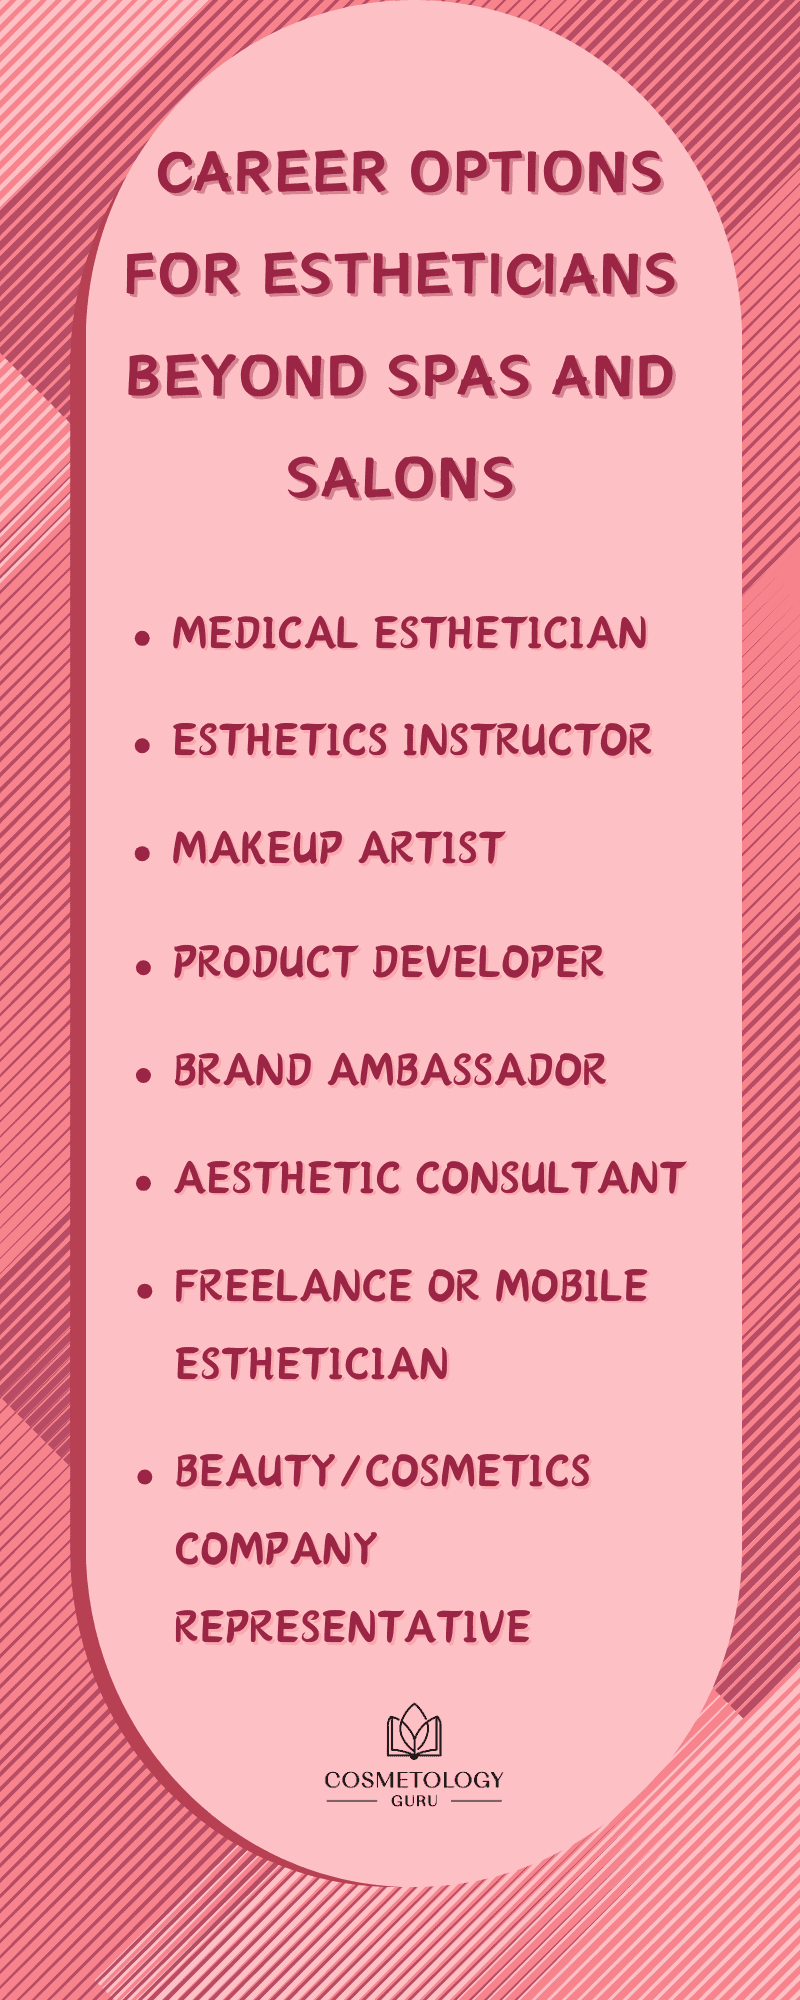 Career Options for Estheticians Beyond Spas and Salons